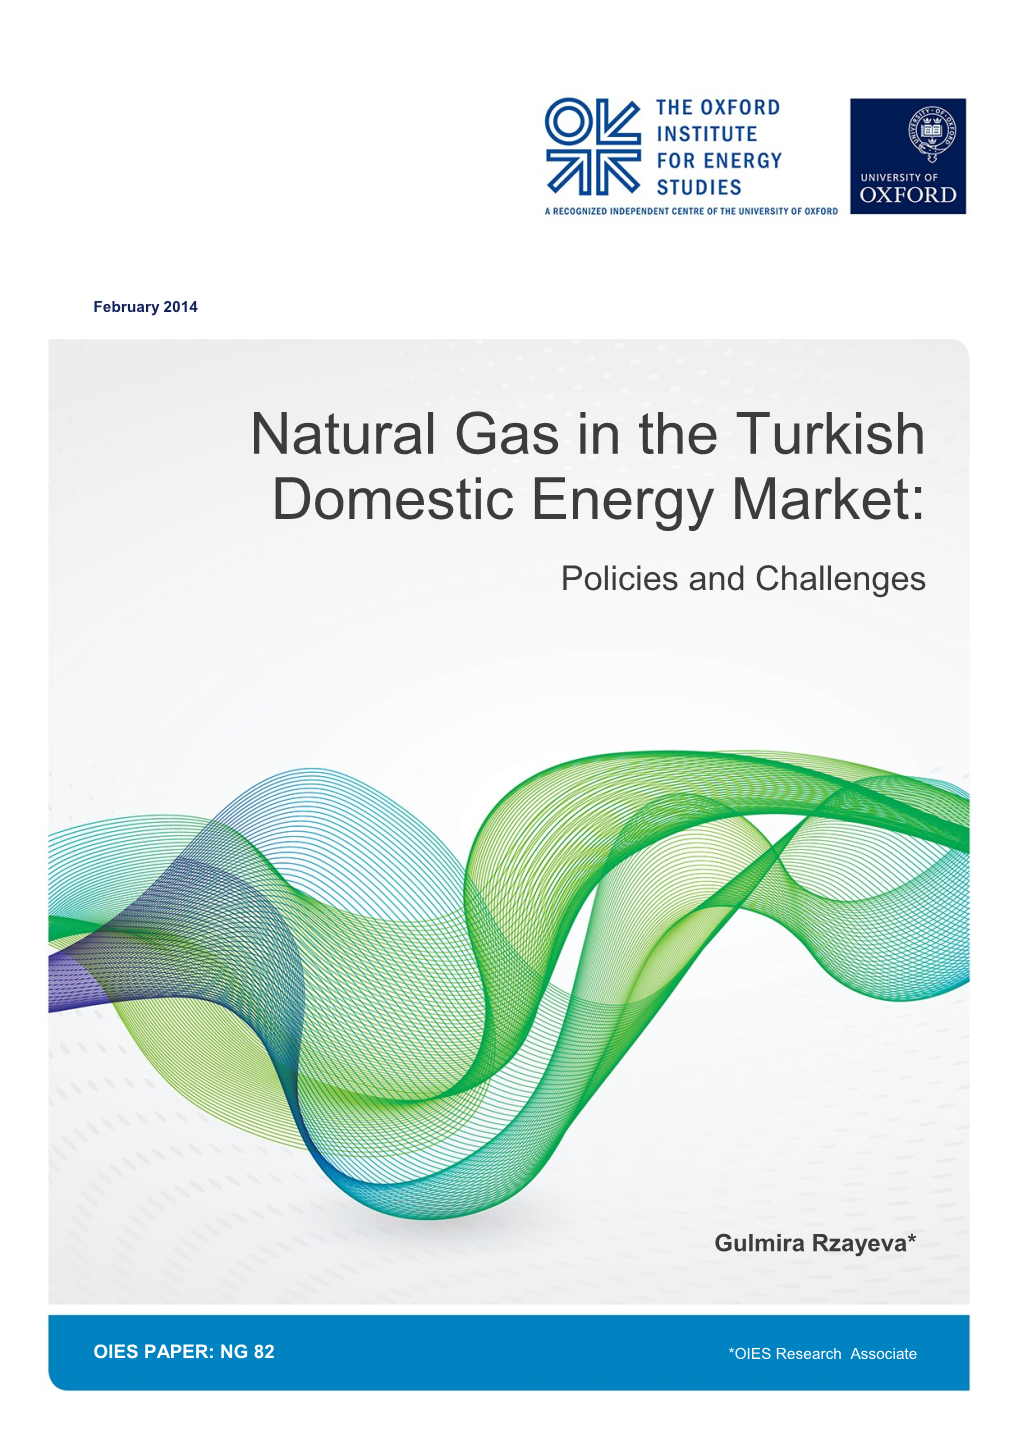 Natural Gas in the Turkish Domestic Energy Market: Policies and Challenges